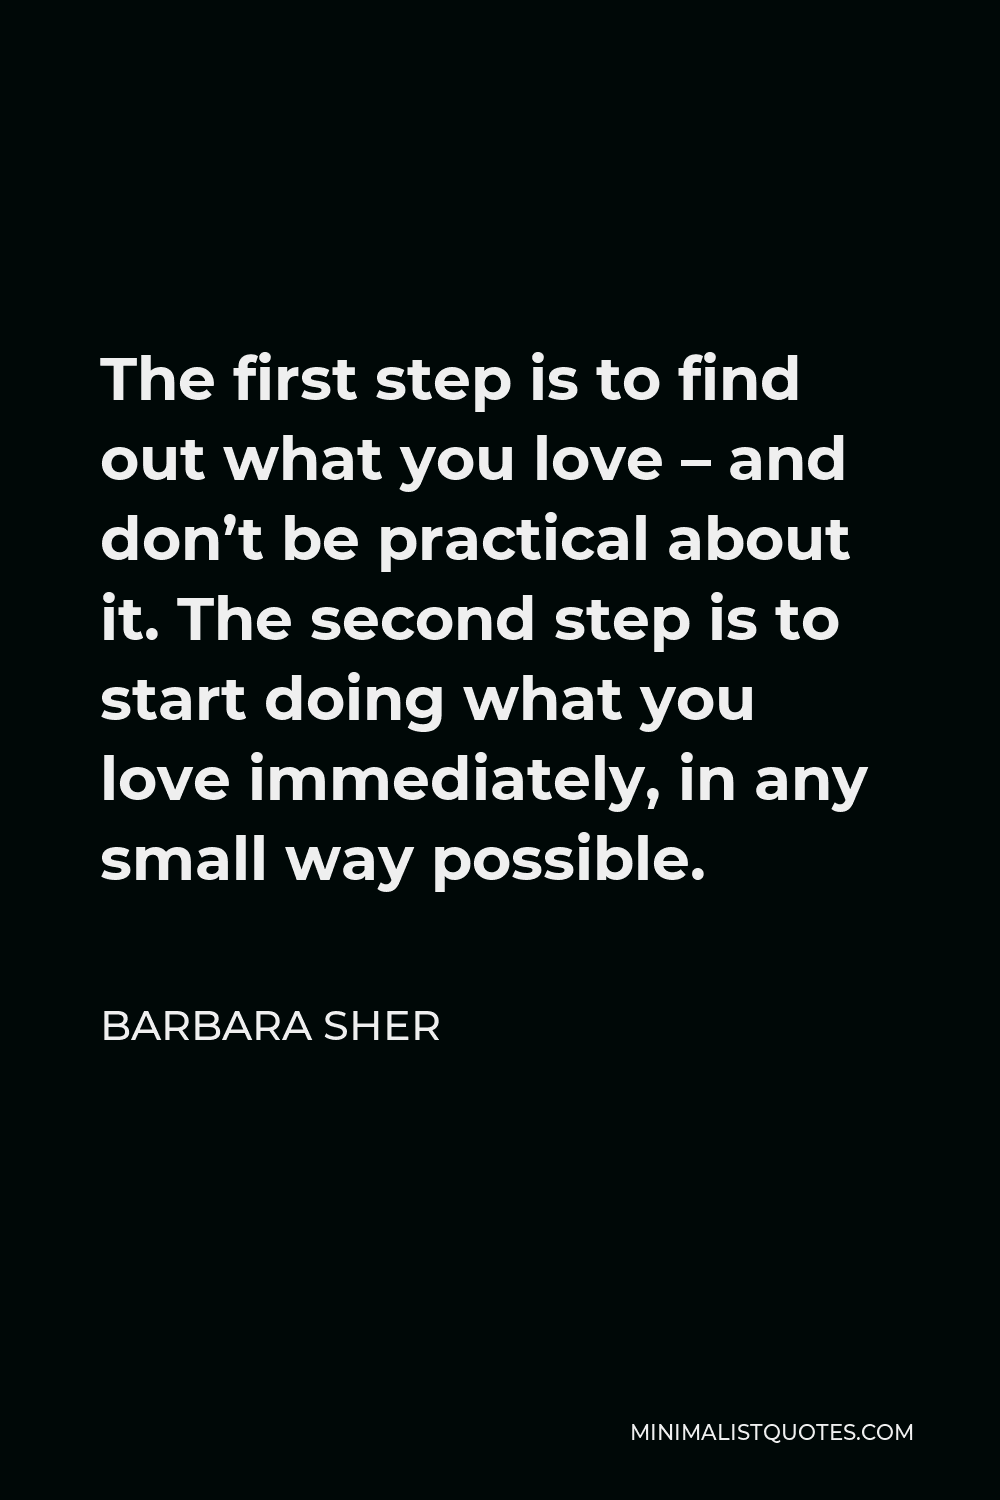 Barbara Sher Quote - The first step is to find out what you love – and don’t be practical about it. The second step is to start doing what you love immediately, in any small way possible.